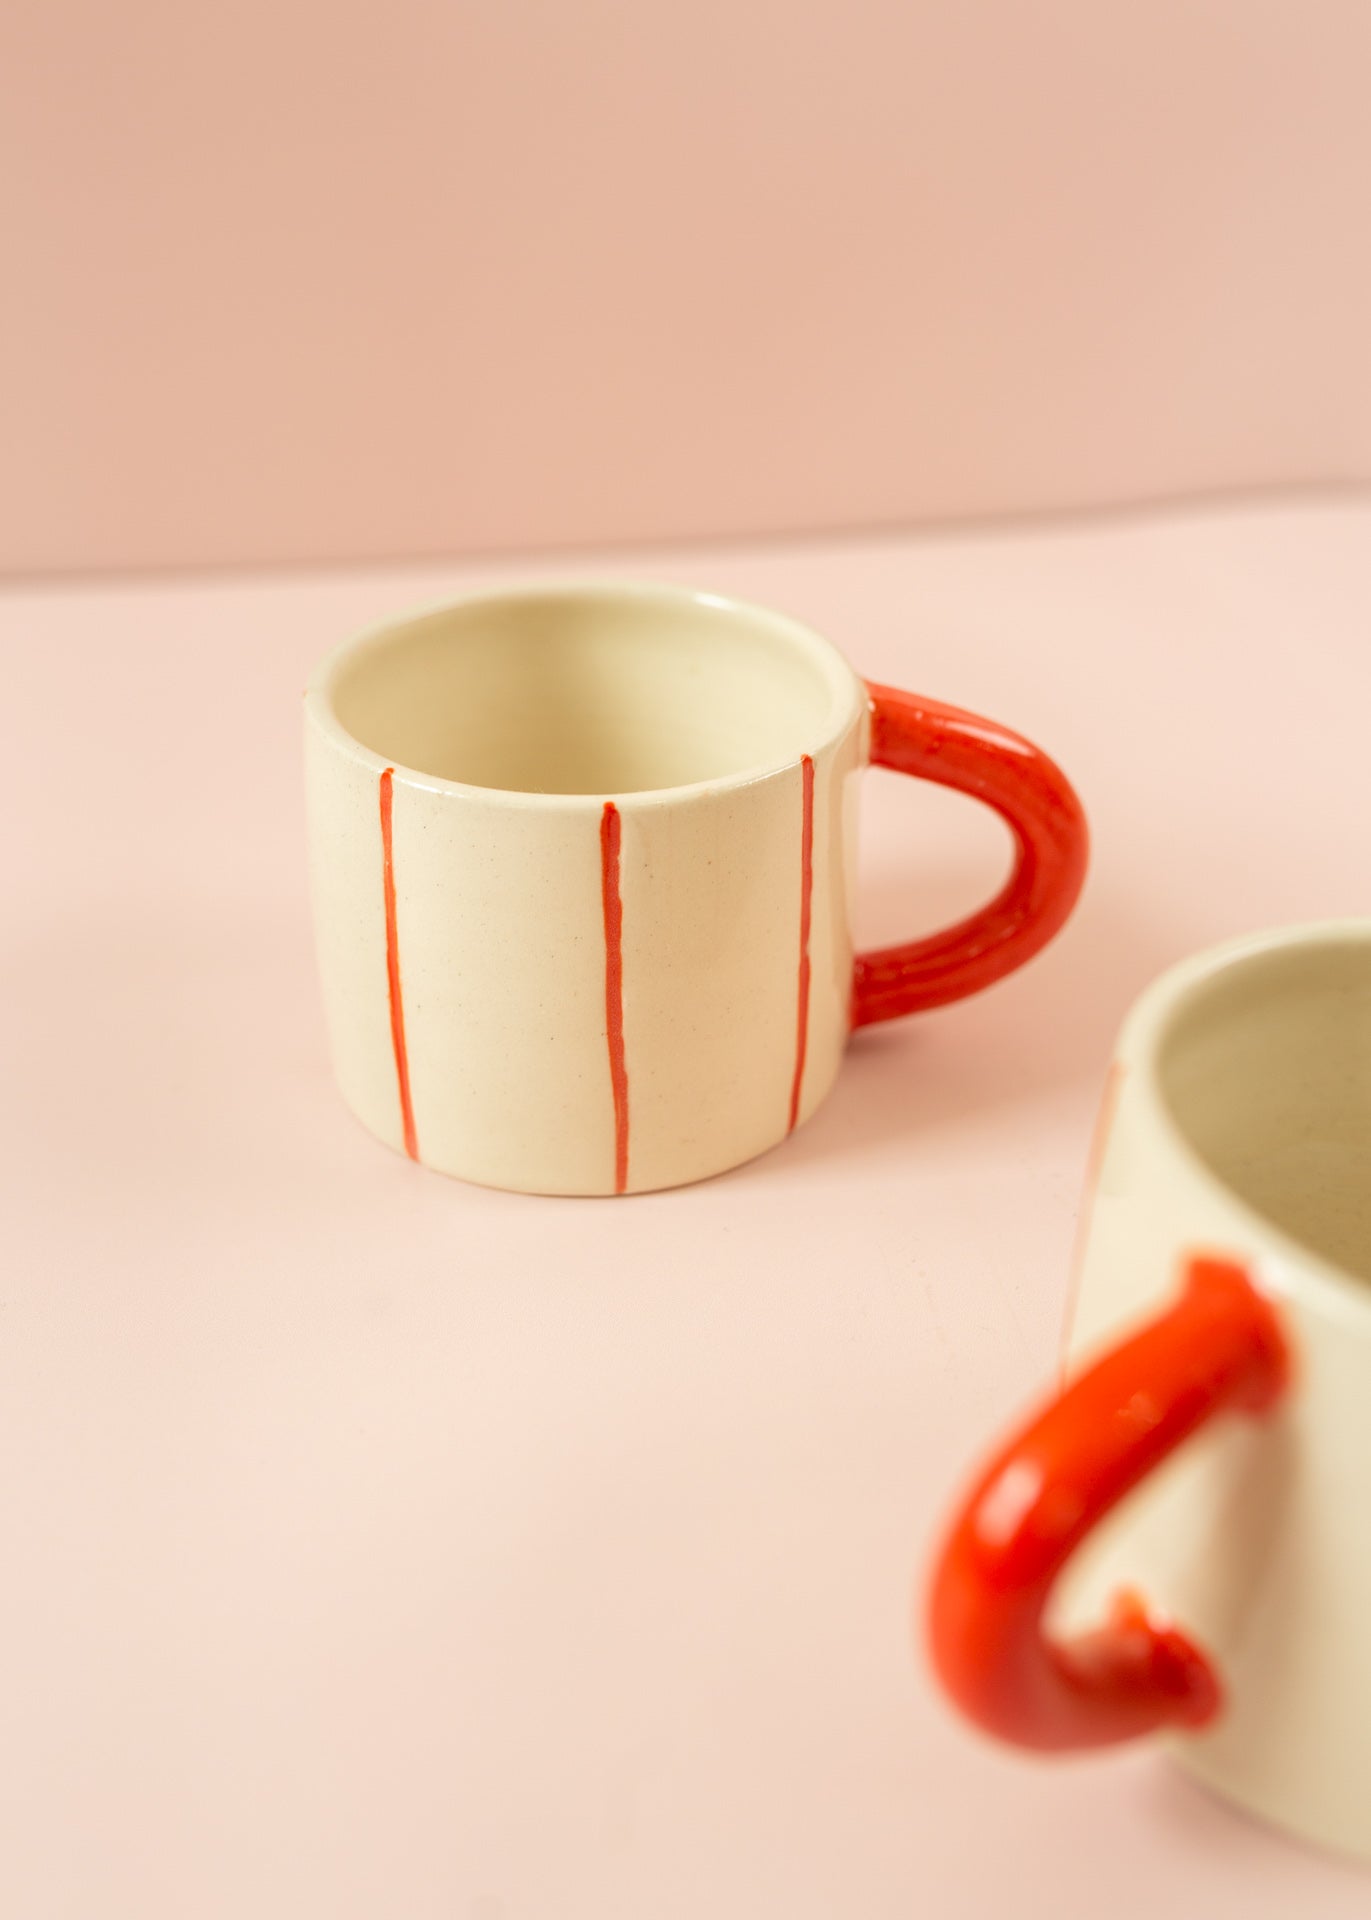 Photo of a cream ceramic mug with light red stripes going around the mug vertically, and a red handle. Another mug is in the foreground